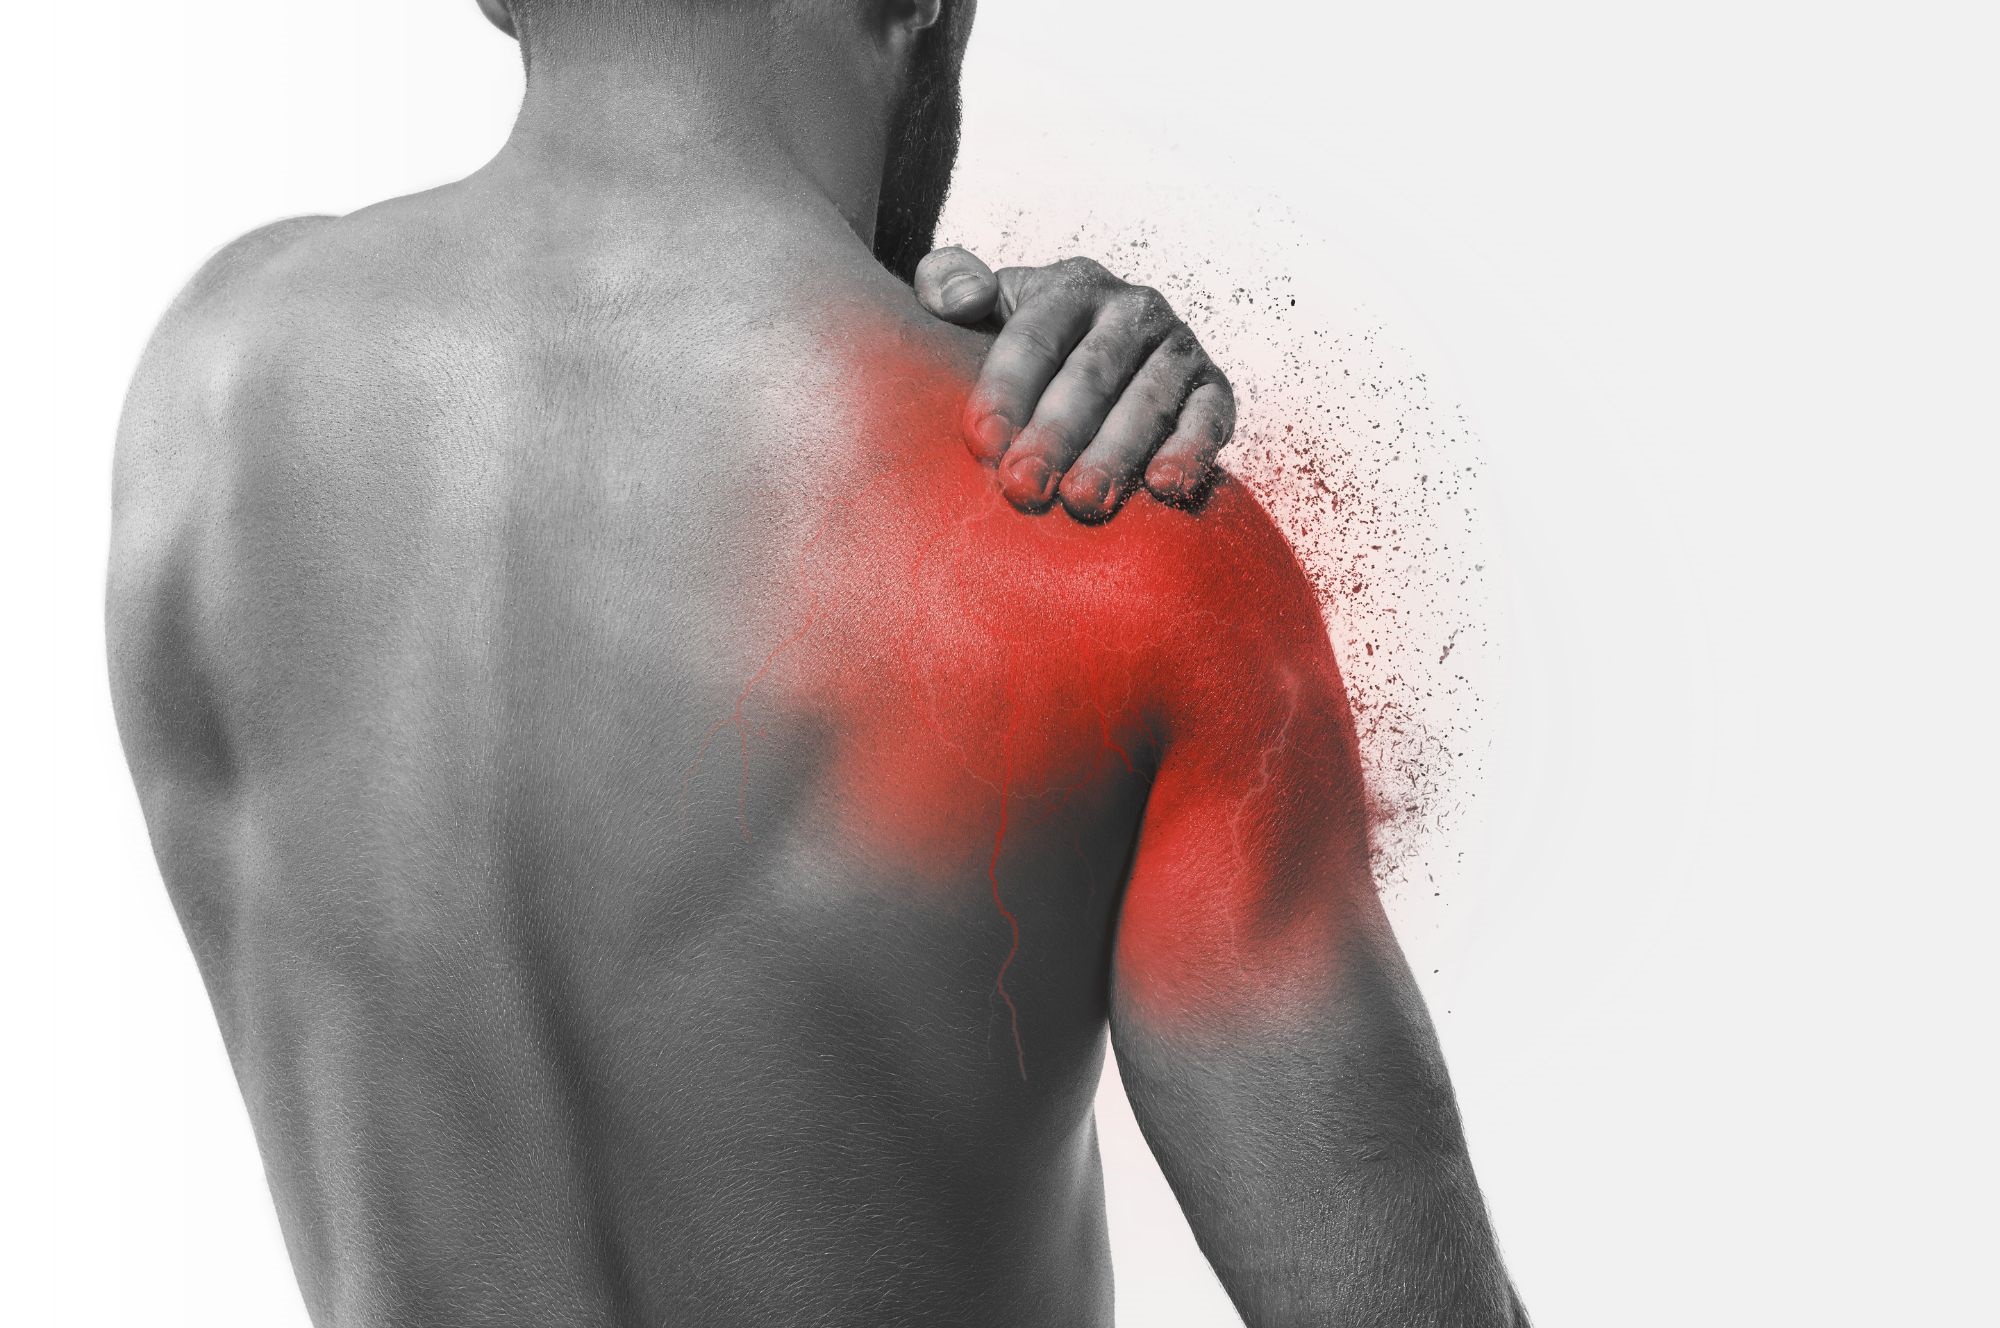 Why Am I Still Suffering From Chronic Pain After Shoulder Replacement Surgery